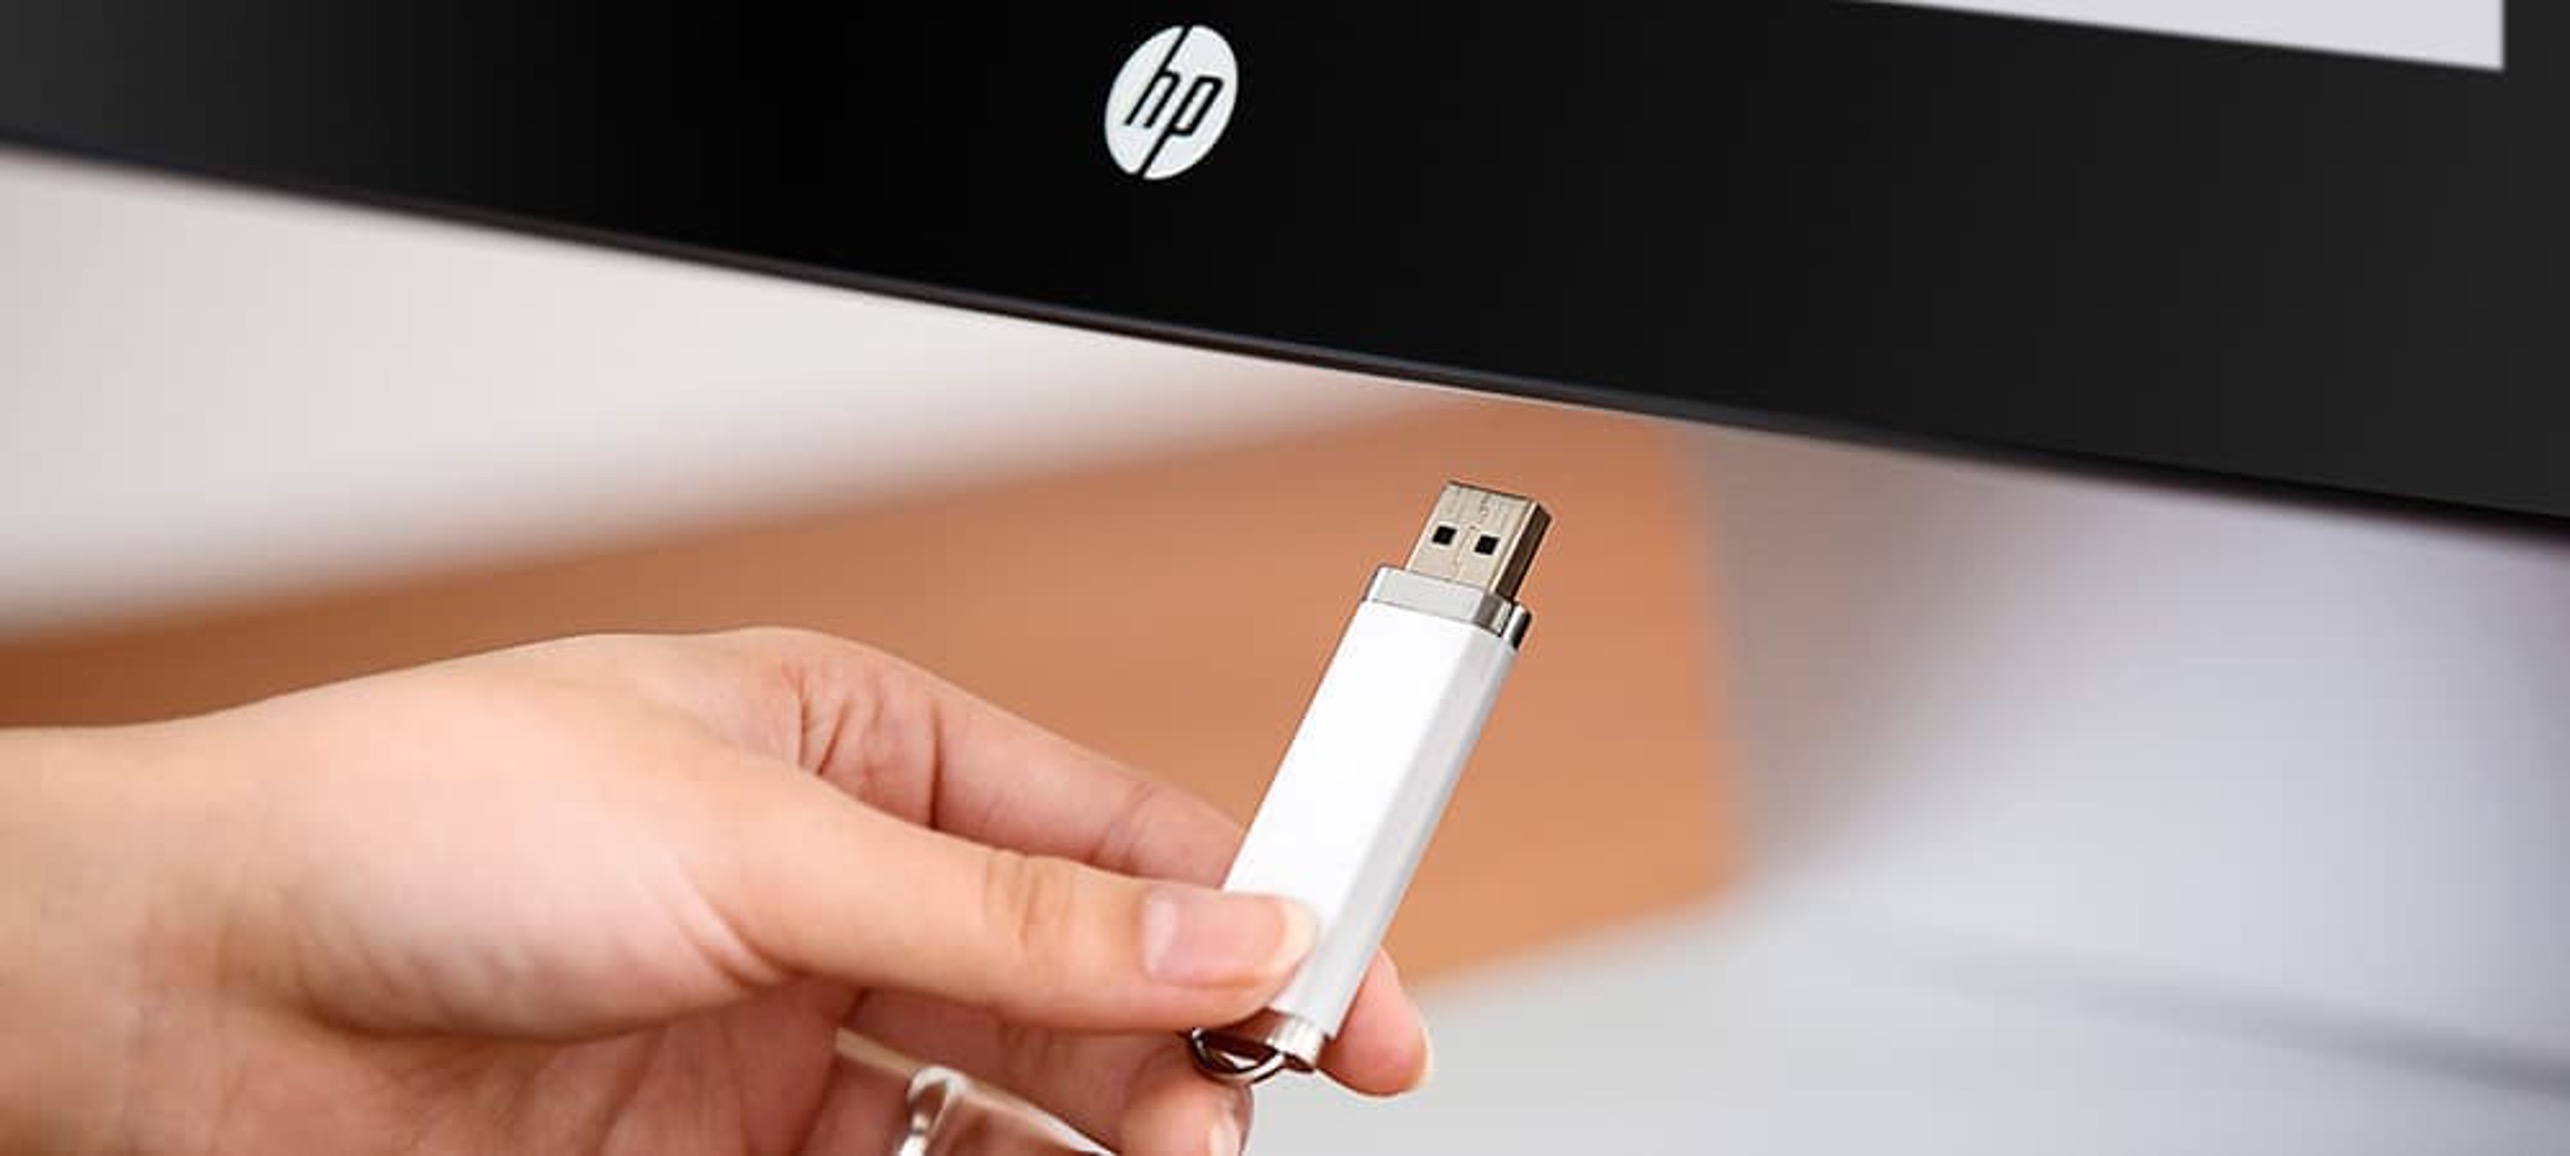 how-to-turn-a-usb-into-a-mini-pc